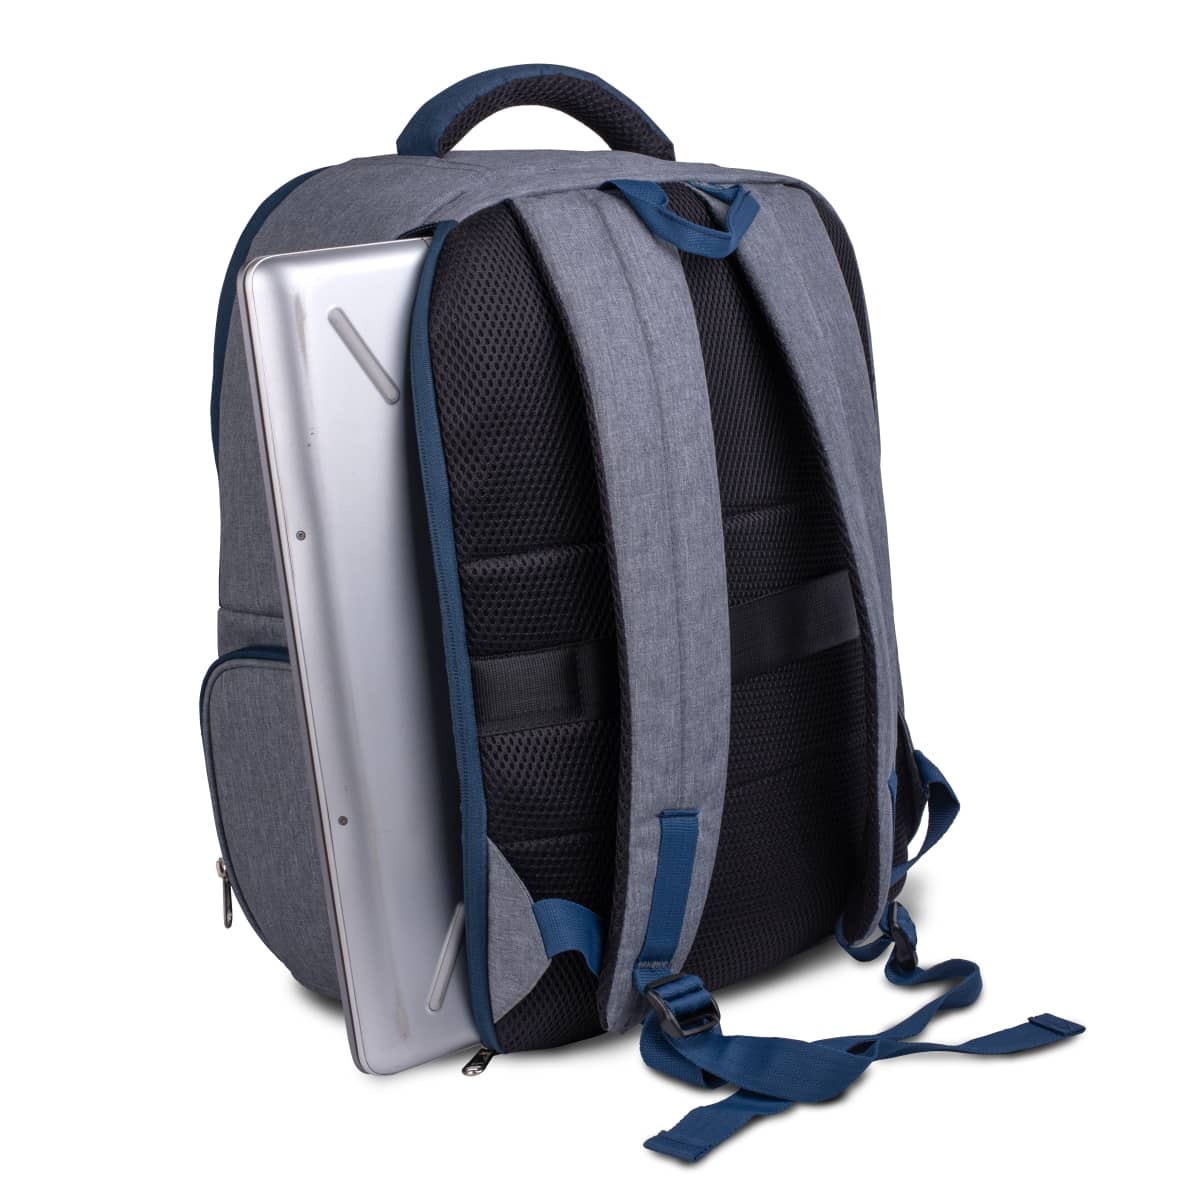 Multipurpose Spacious Executive Backpack with Lunch Box and Rain Cover - For Employees, Travelers, Corporate, Client or Dealer Gifting, Events Promotional Freebies BGS35